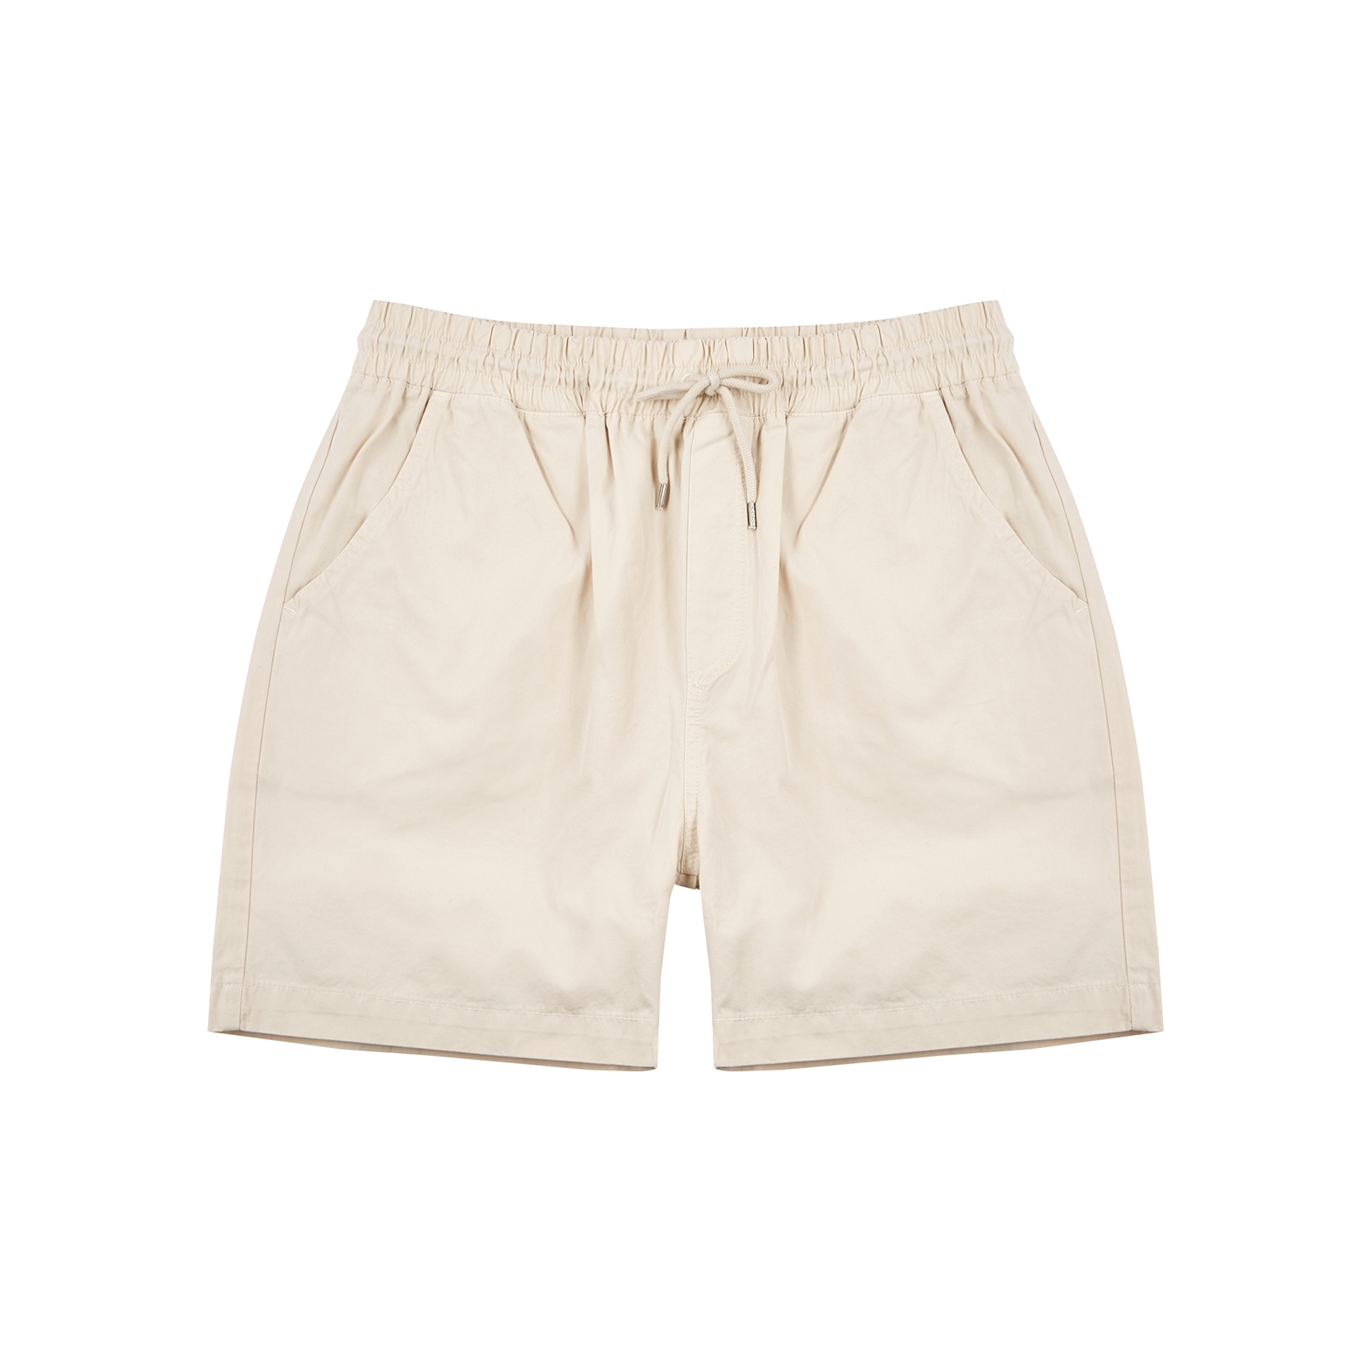 Colorful Standard Off-white Cotton Shorts